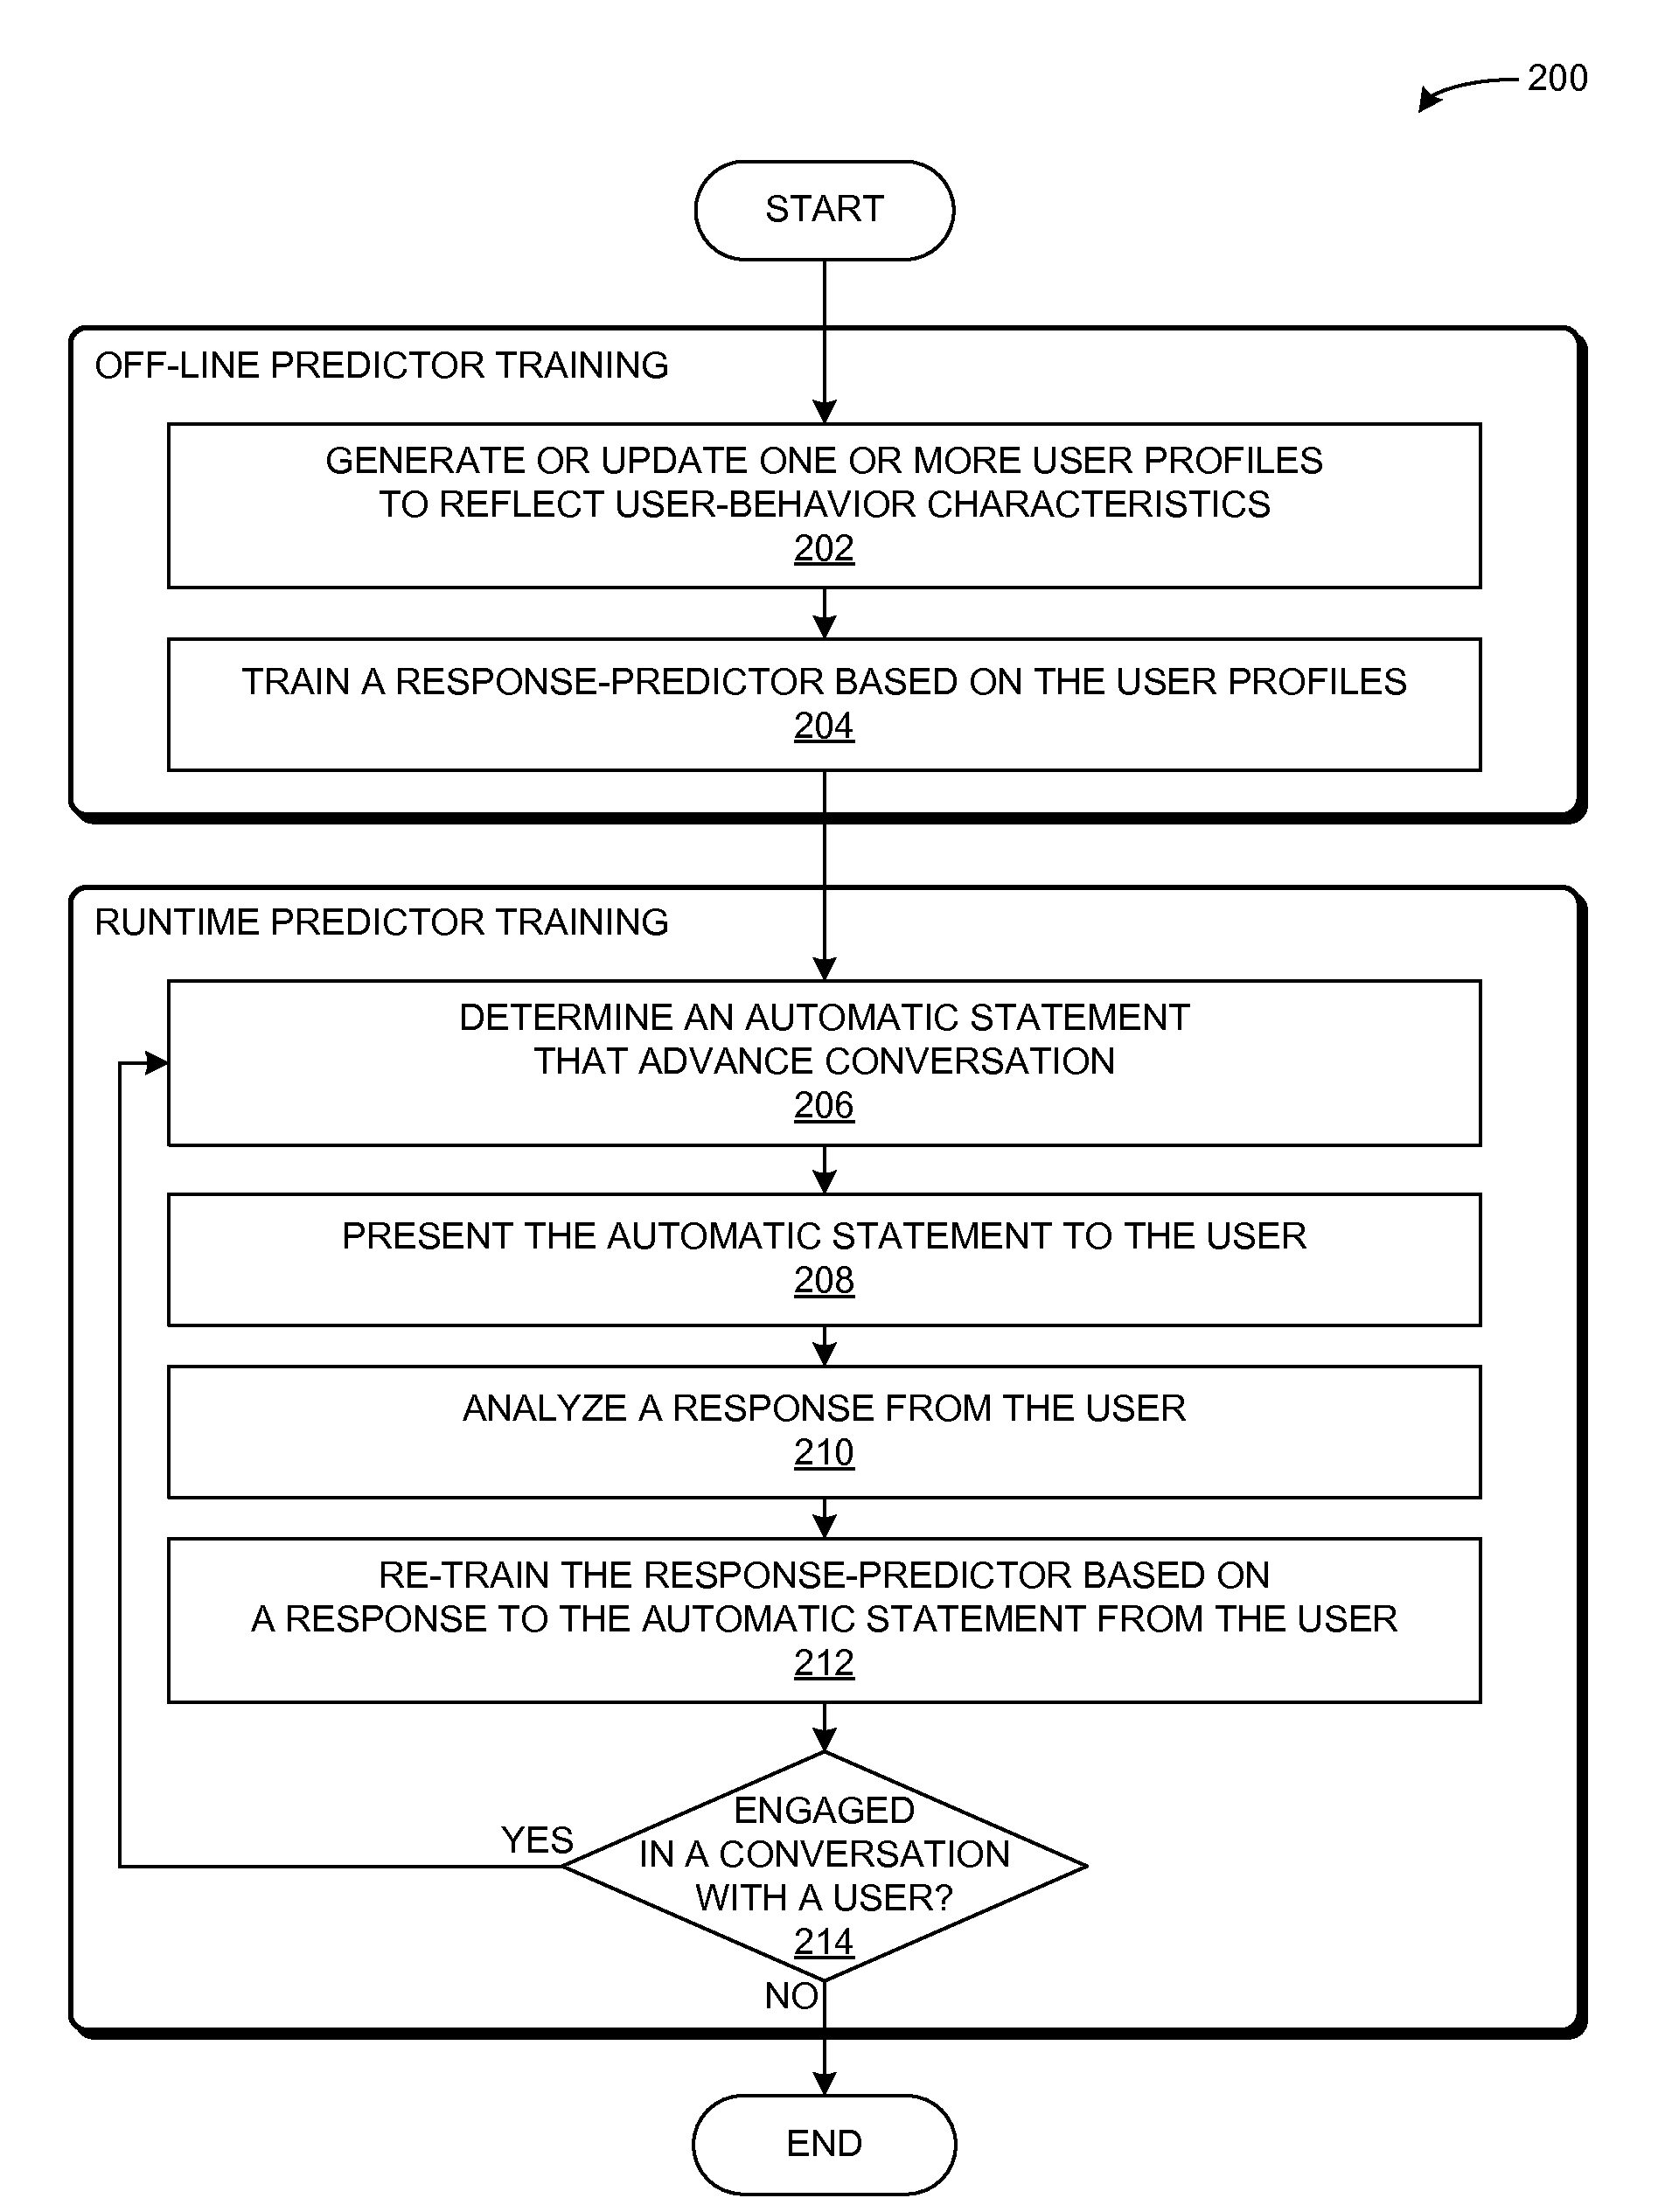 Method and apparatus for customizing conversation agents based on user characteristics using a relevance score for automatic statements, and a response prediction function